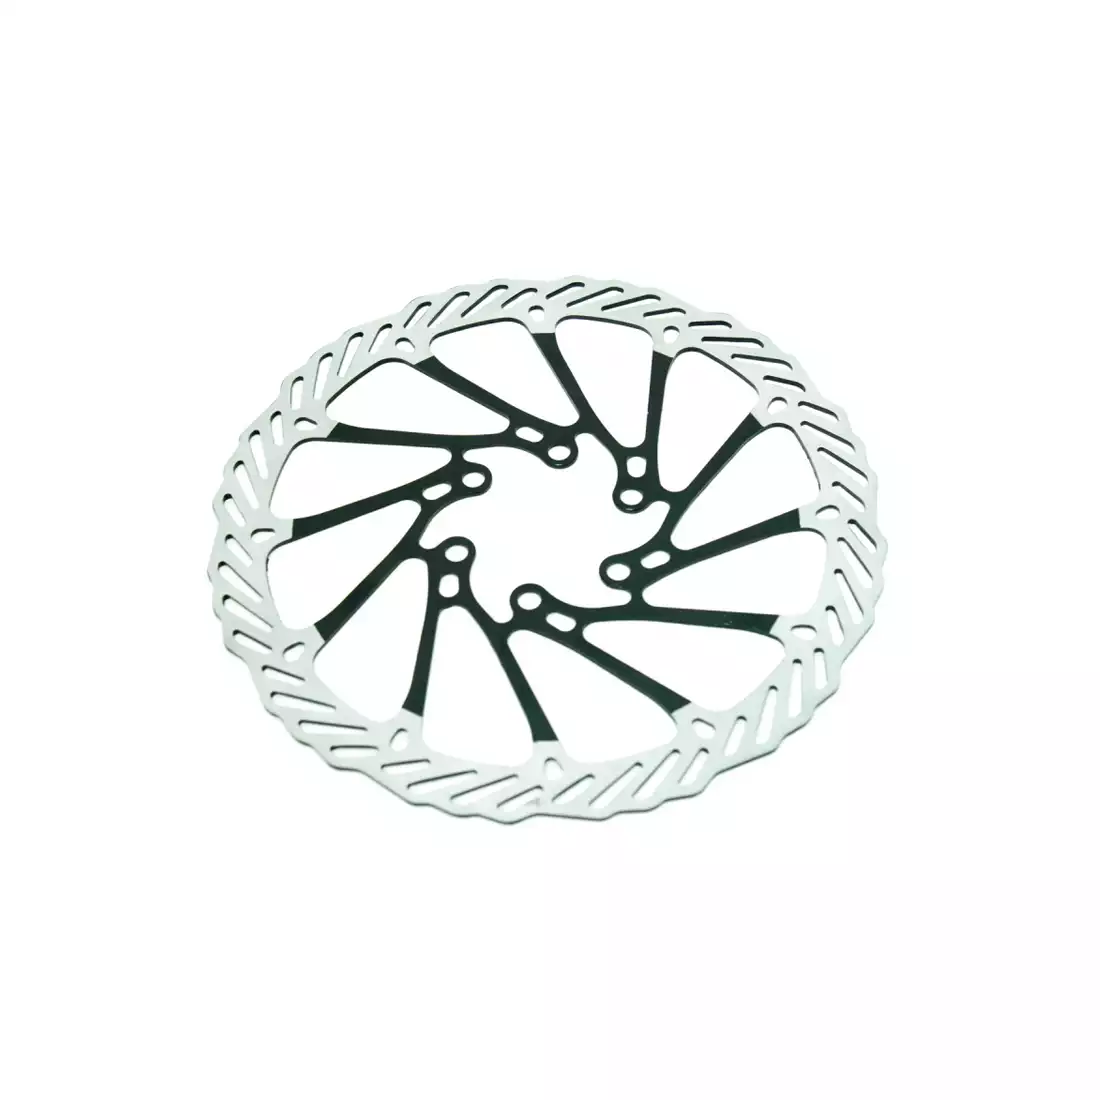 CLARKS CL brake disc 180 mm for 6 bolts IS silver- black